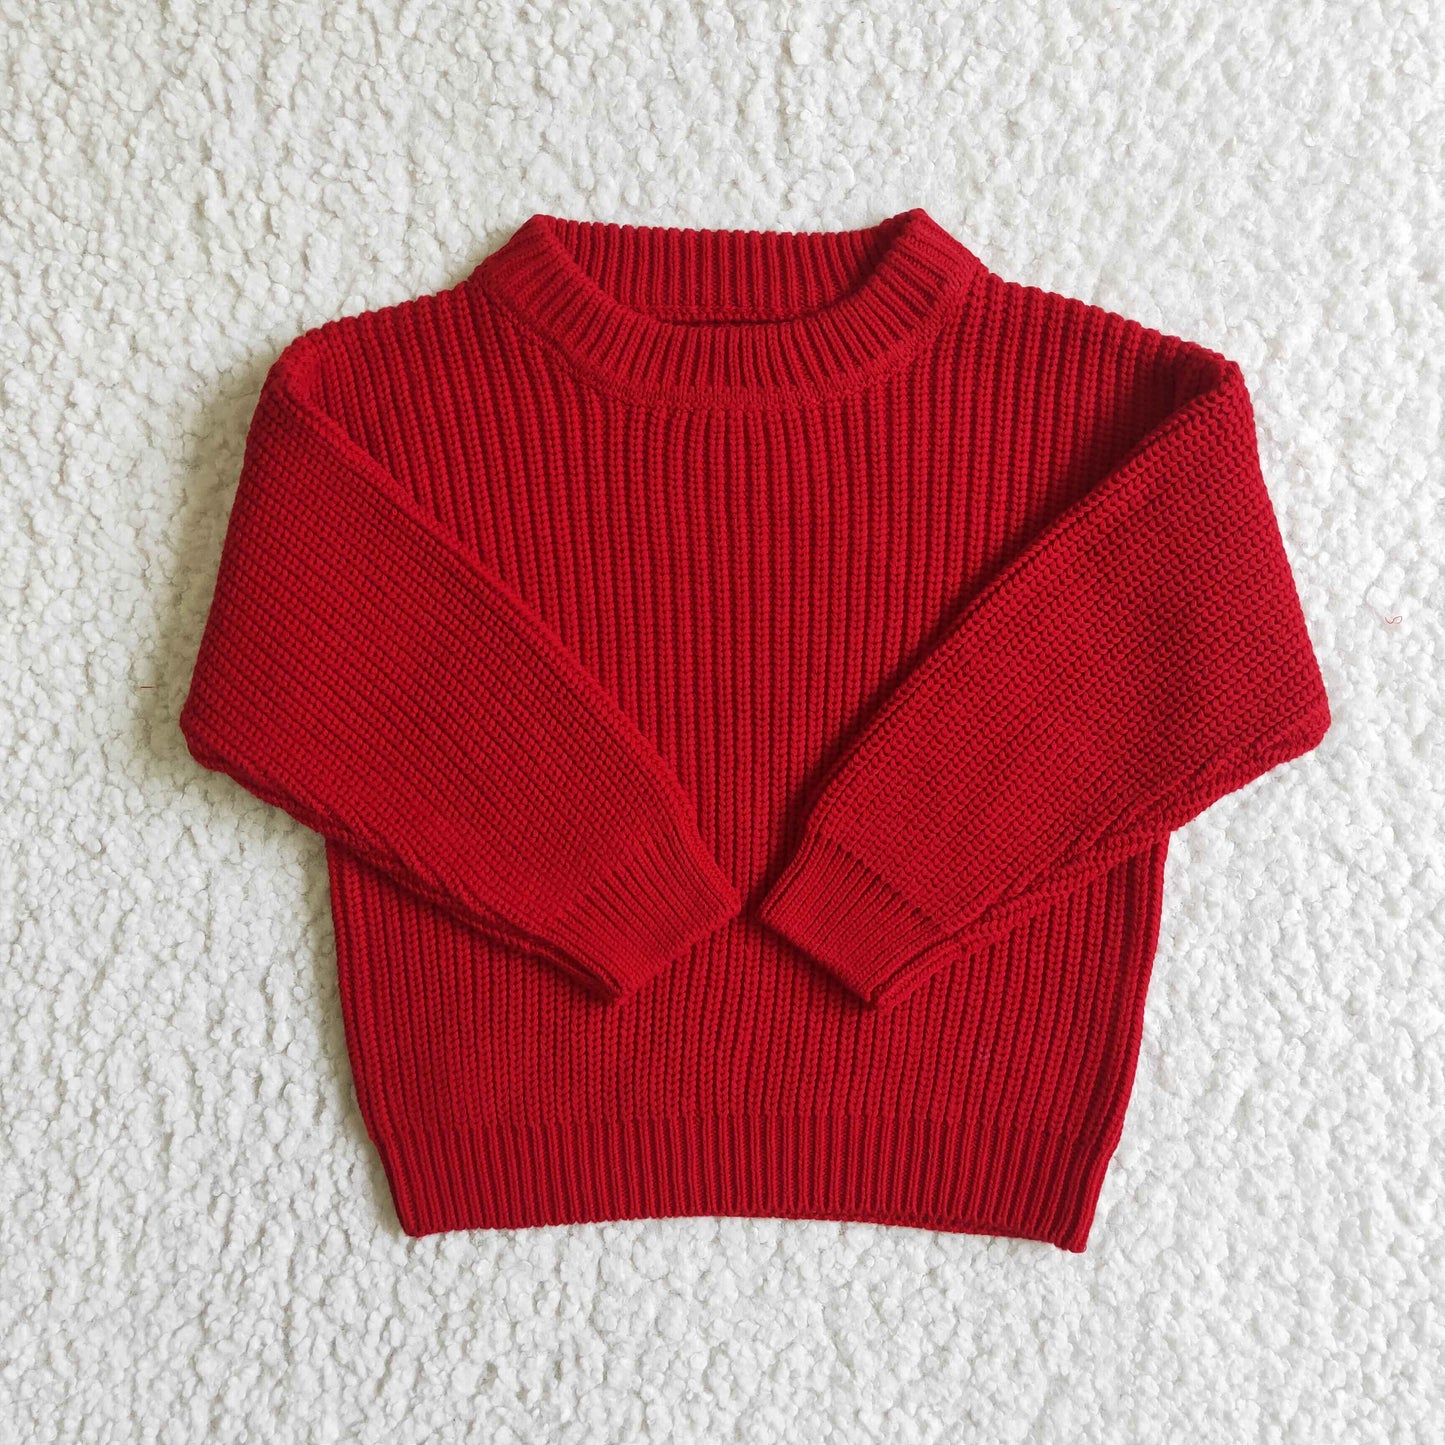 Red cotton winter sweater